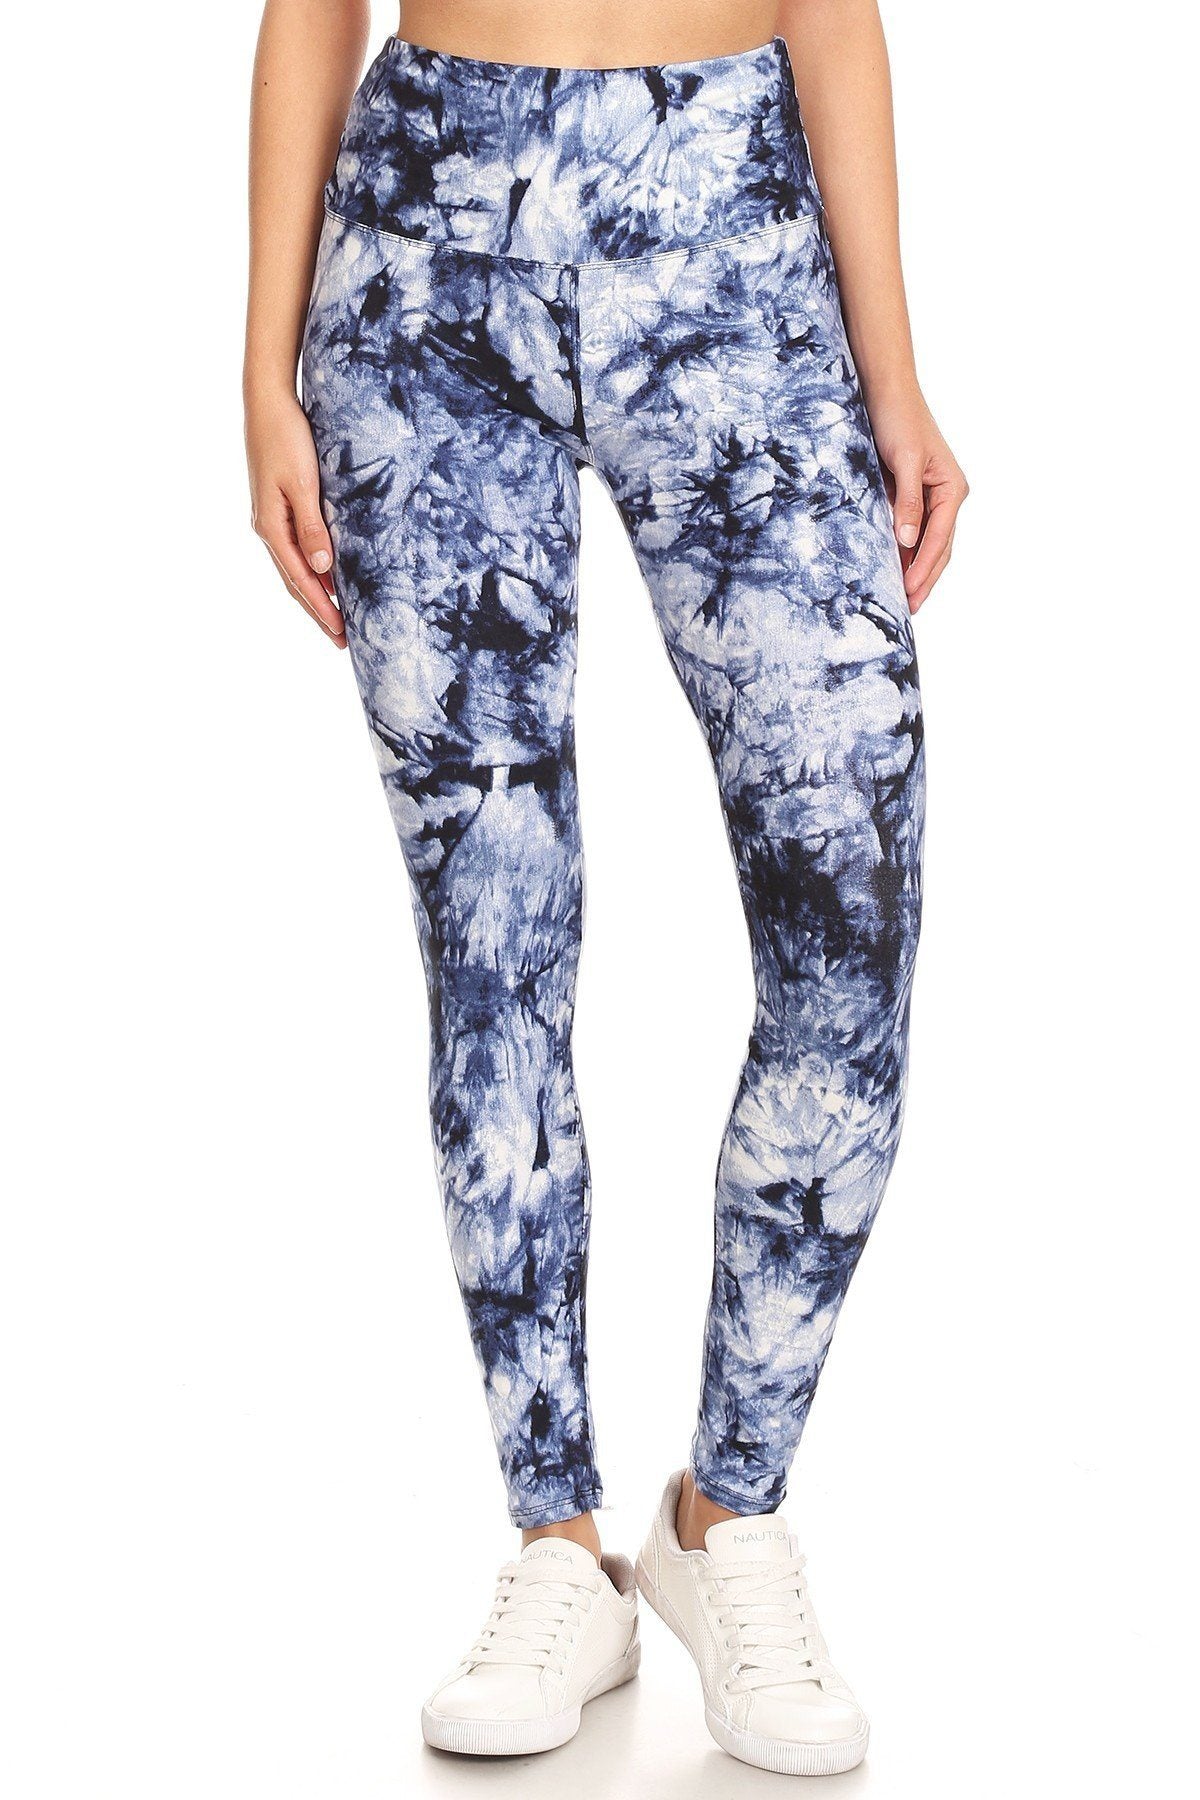 5-inch Long Yoga Style Banded Lined Tie Dye Printed Knit Legging With High Waist - Fashion Quality Boutik